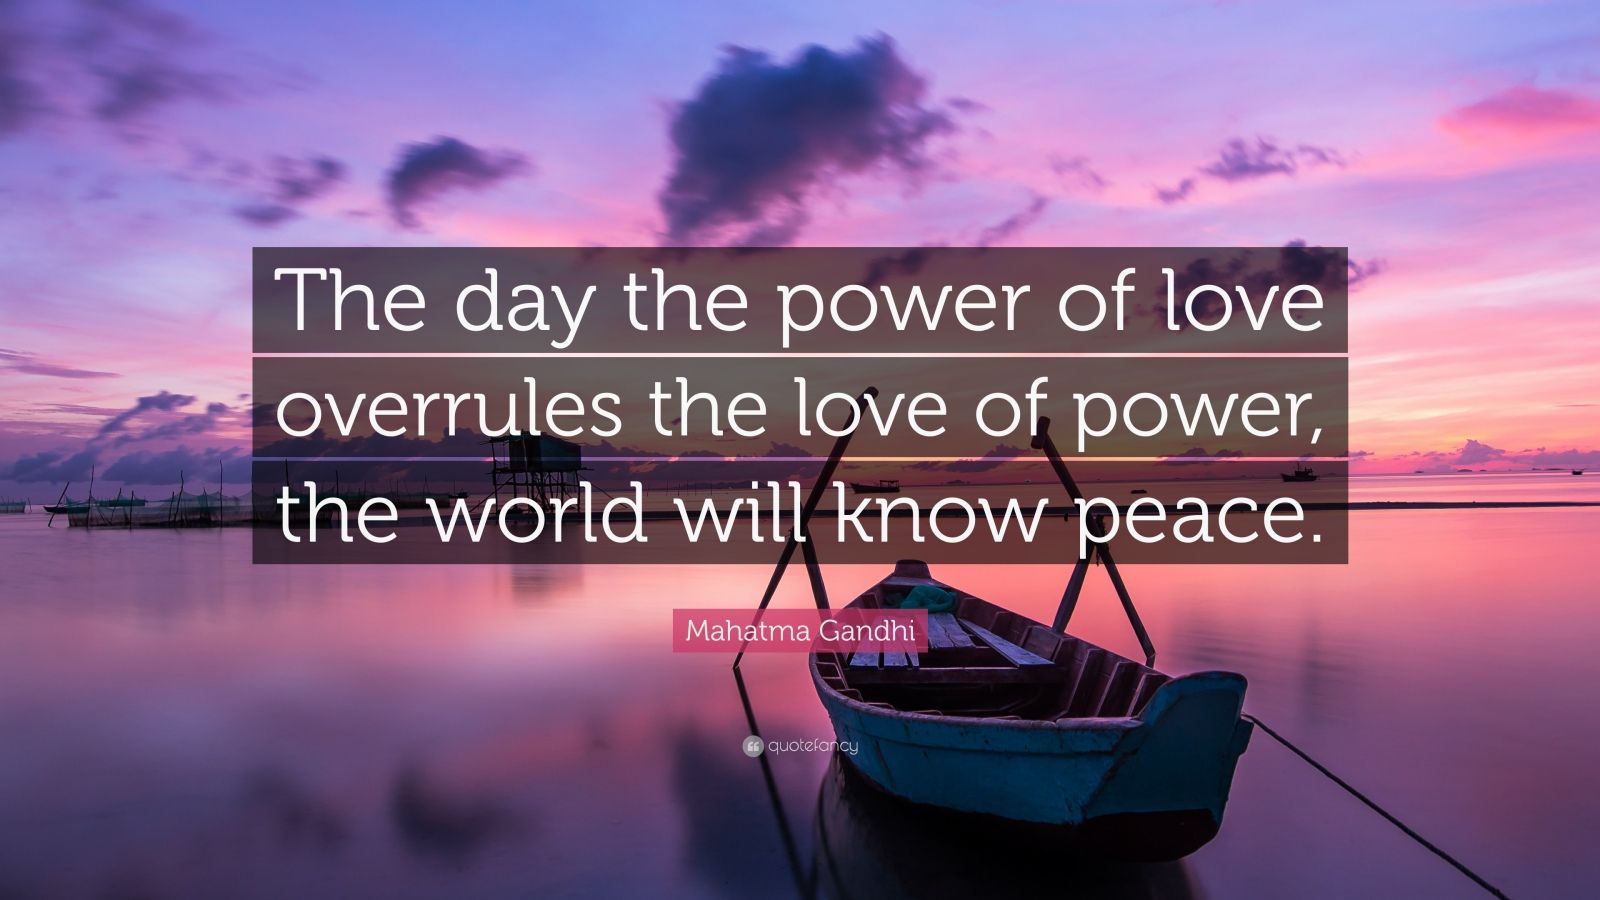 Mahatma Gandhi Quote: “The day the power of love overrules ...